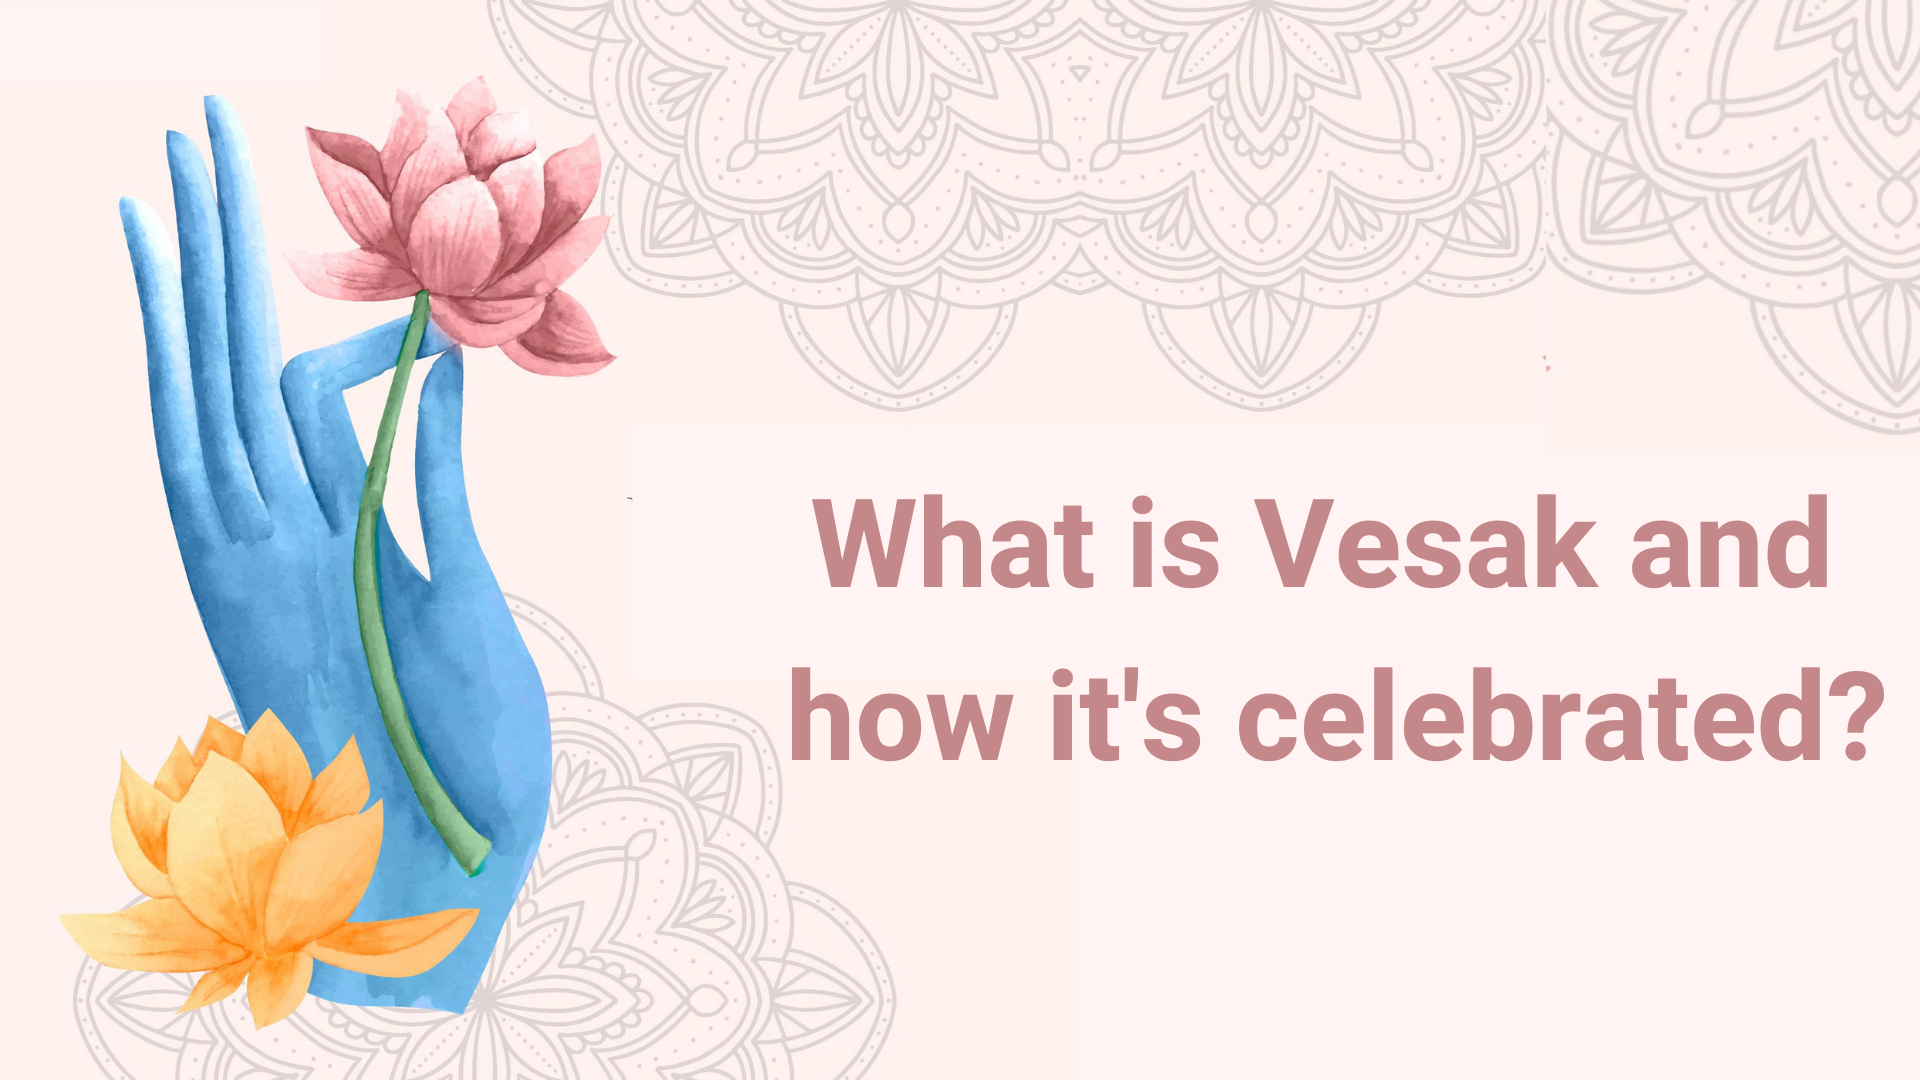 What is Vesak and how it’s celebrated?